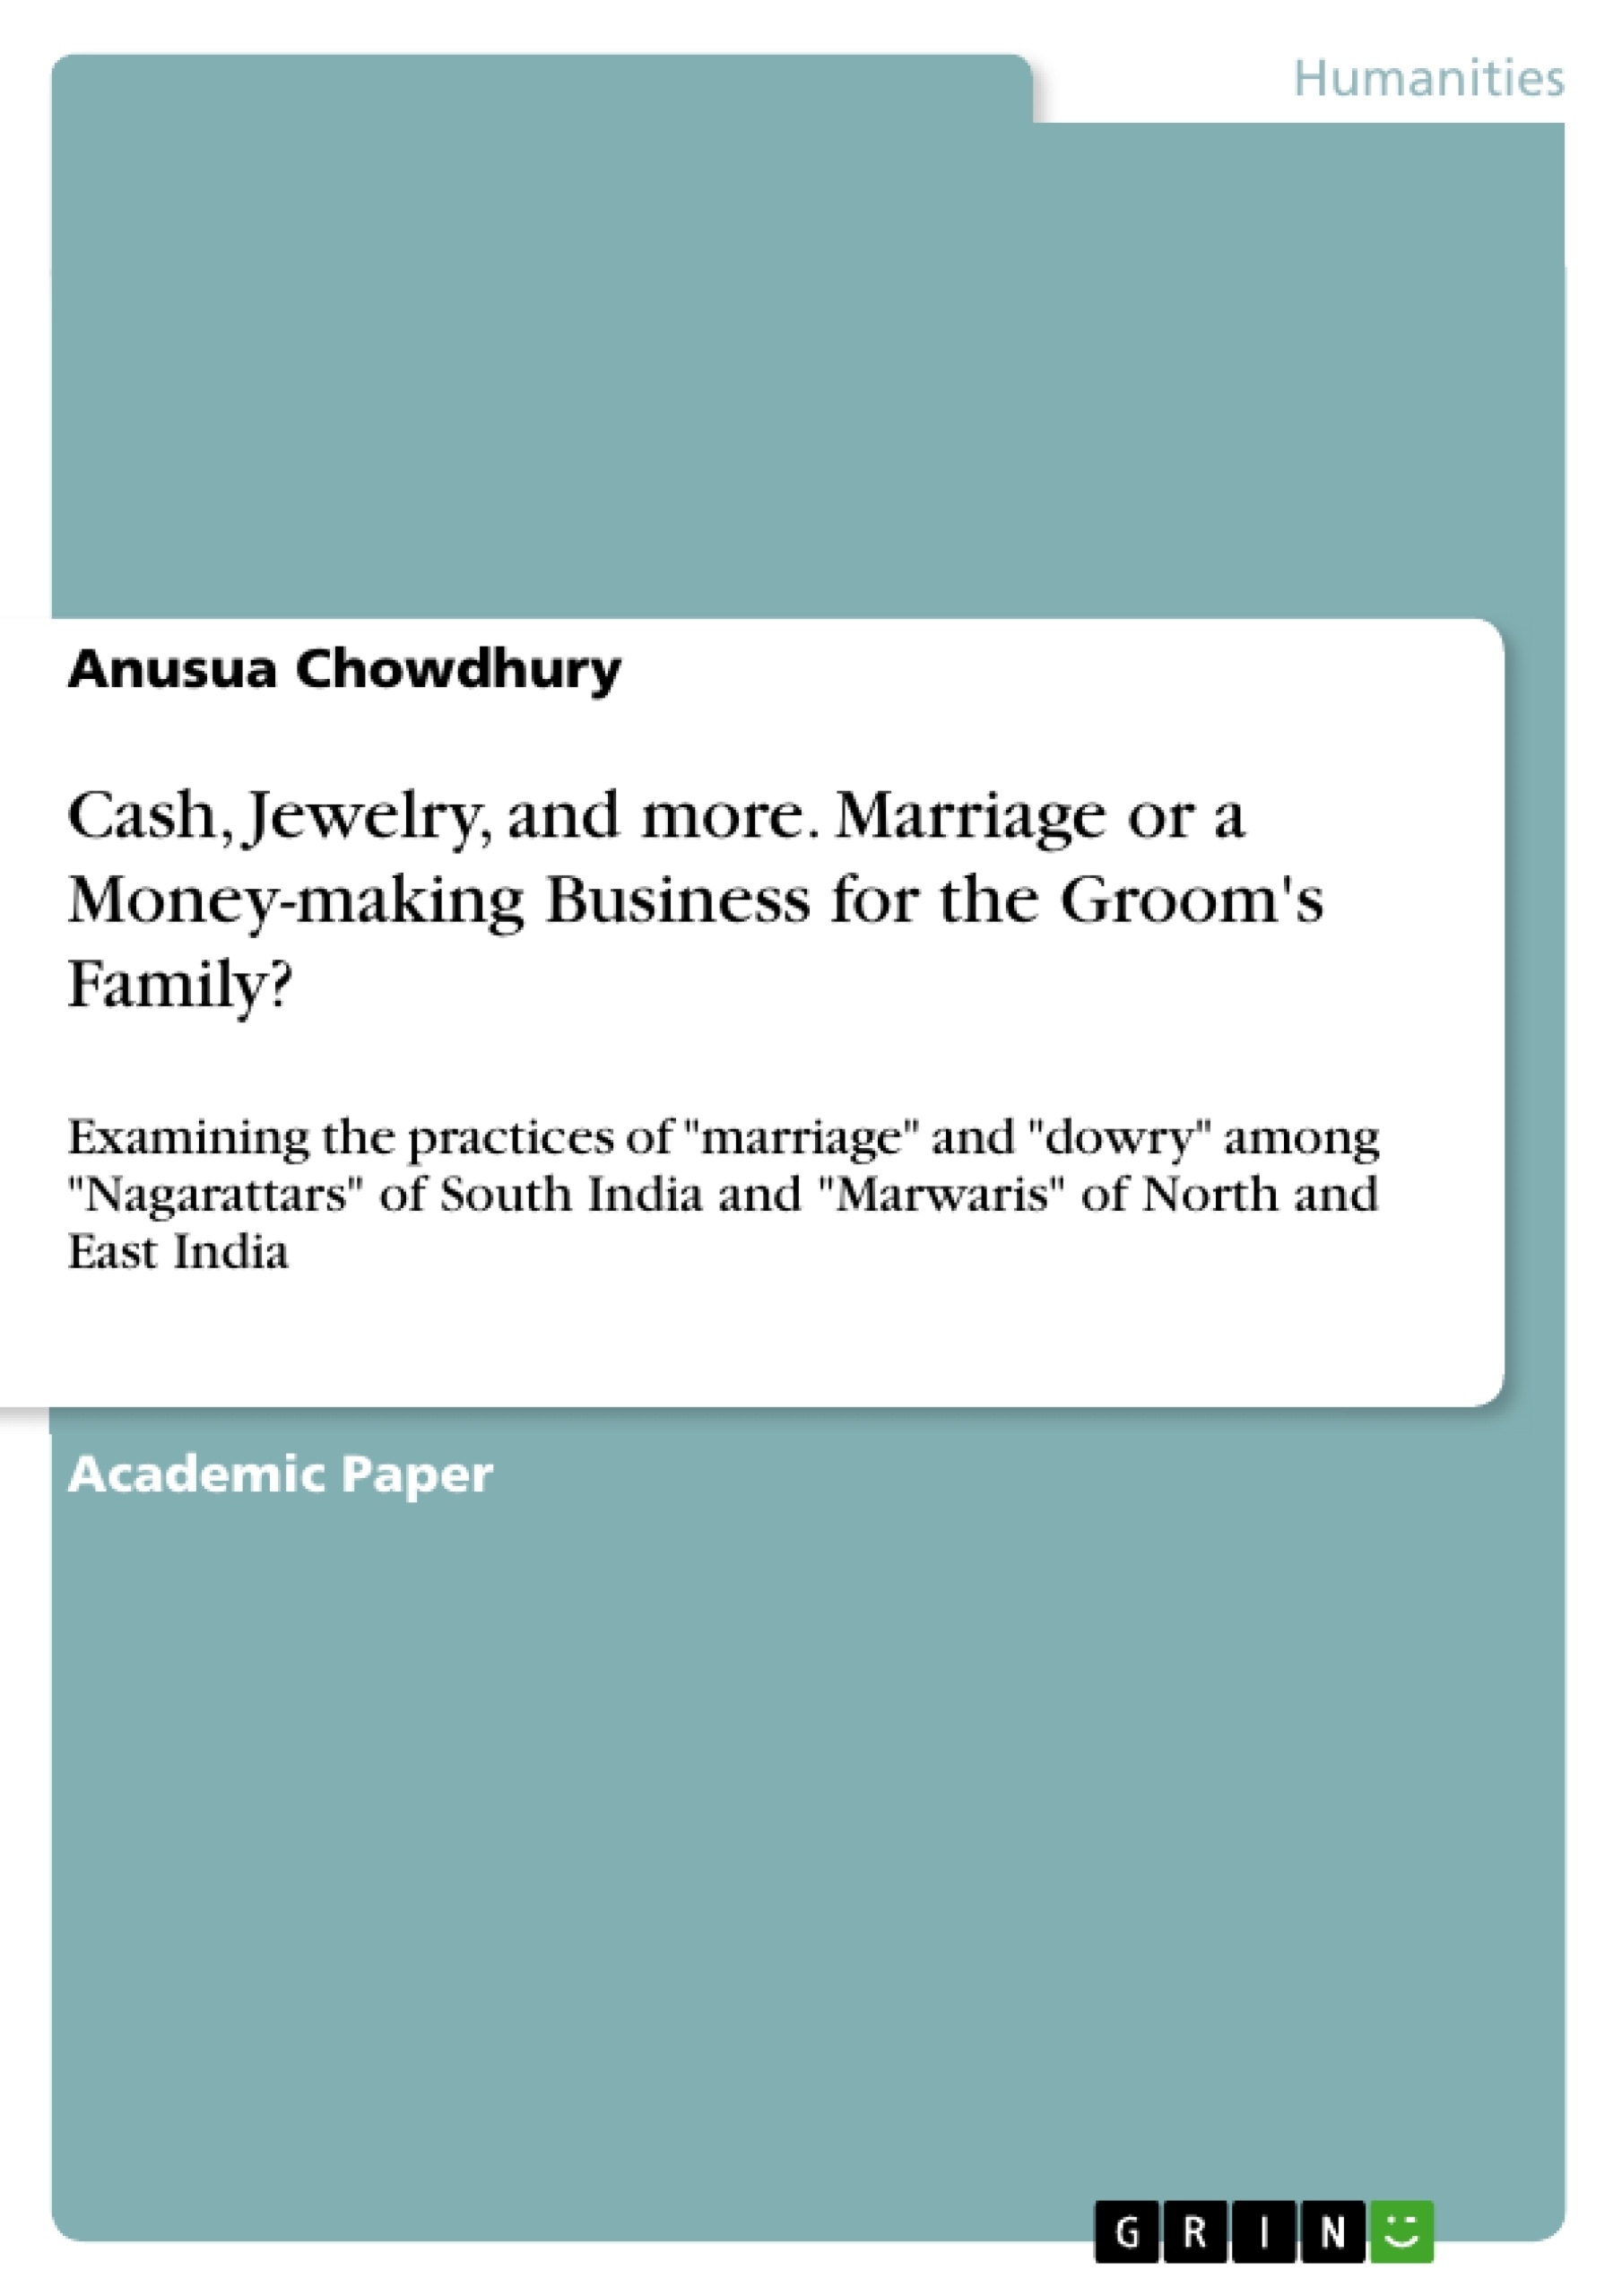 Title: Cash, Jewelry, and more. Marriage or a Money-making Business for the Groom's Family?